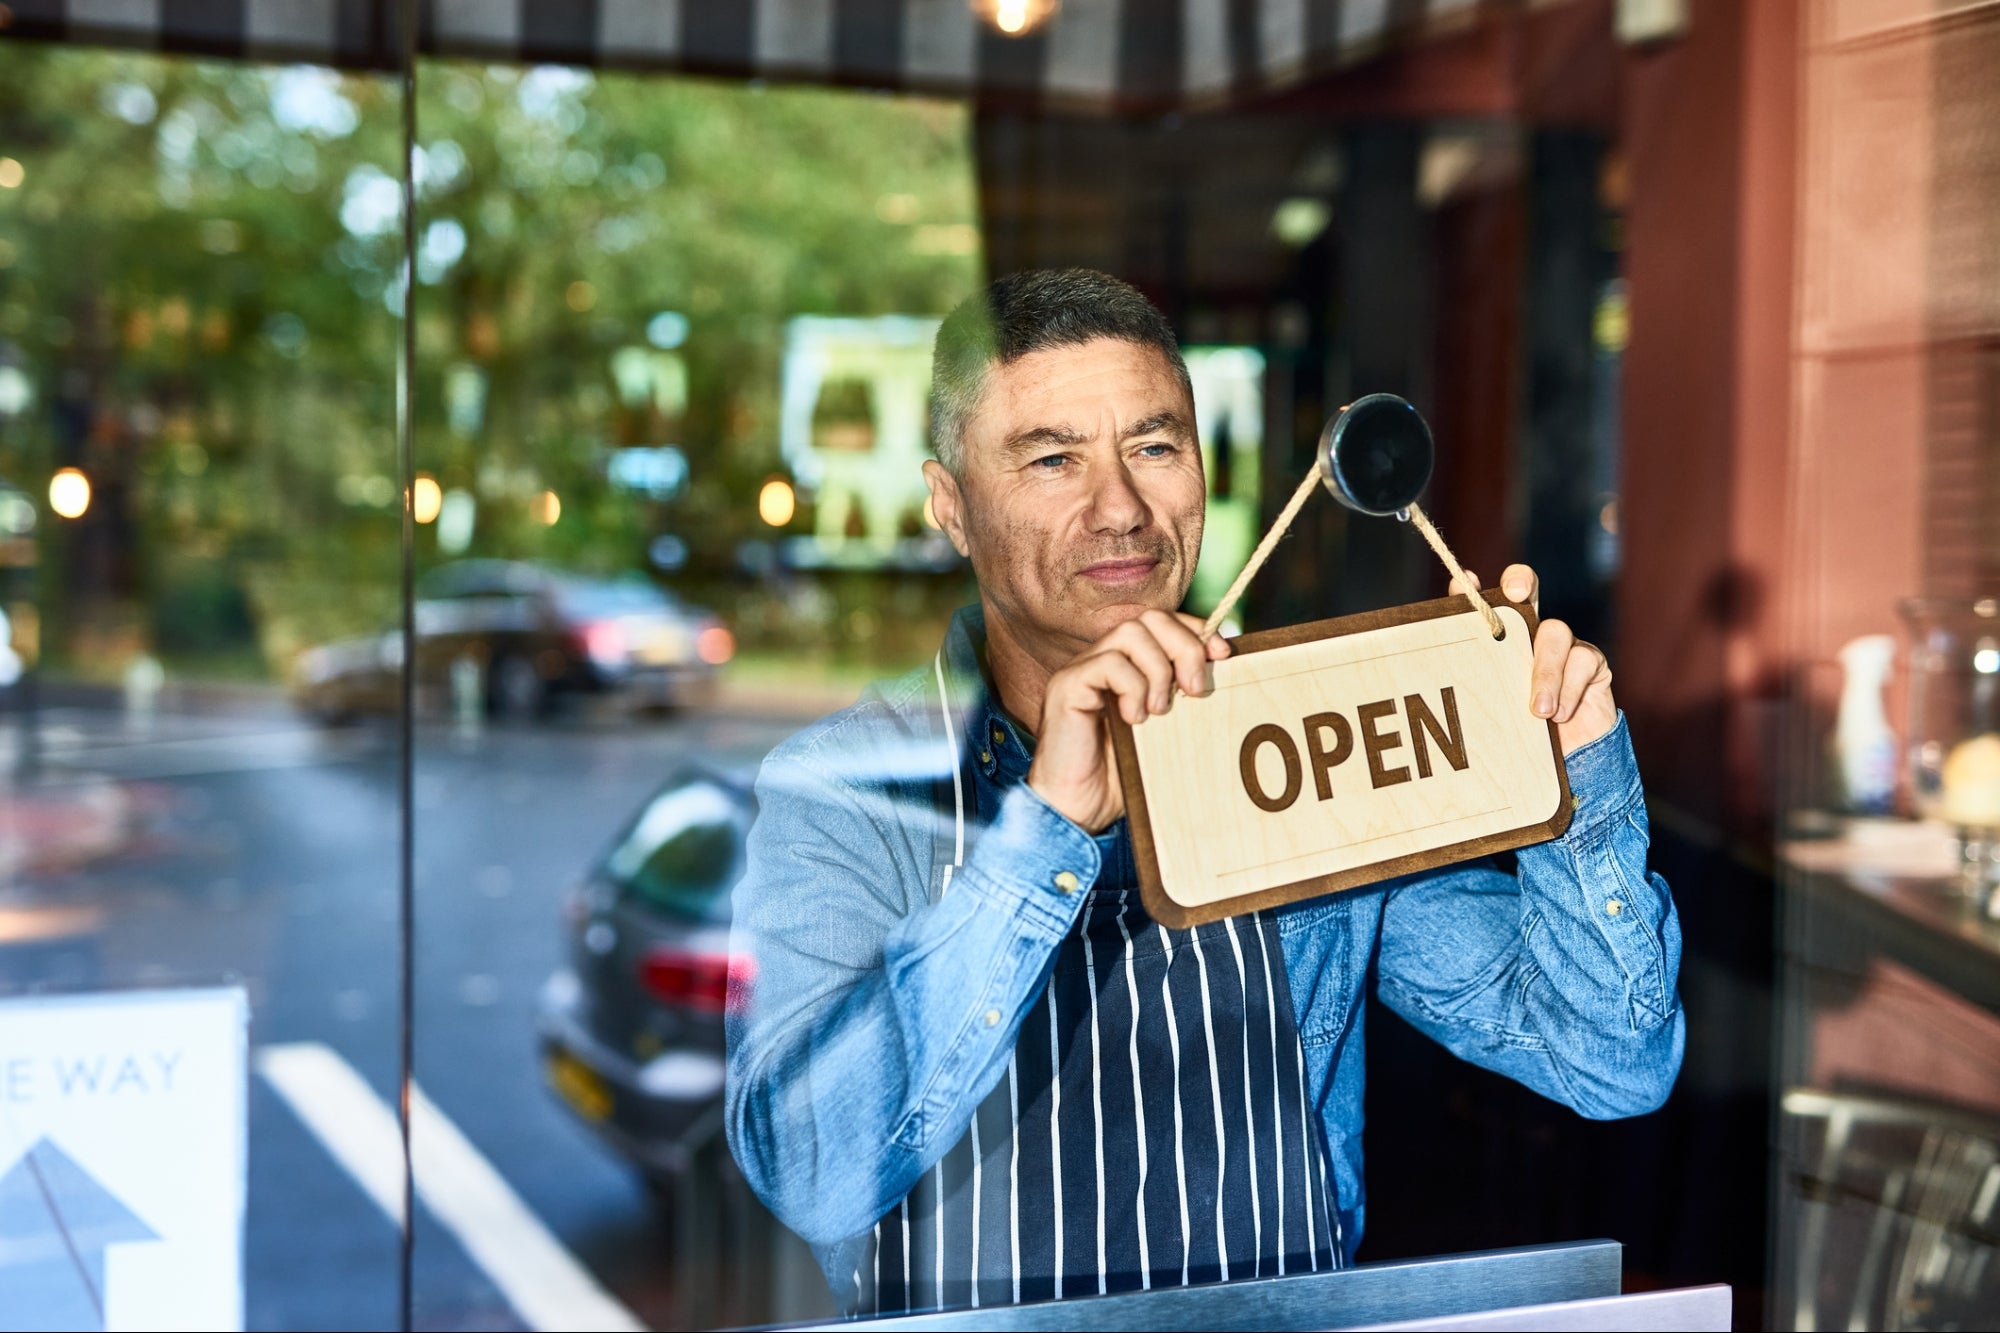 5 Steps You Can Take to Start a Small Town Business